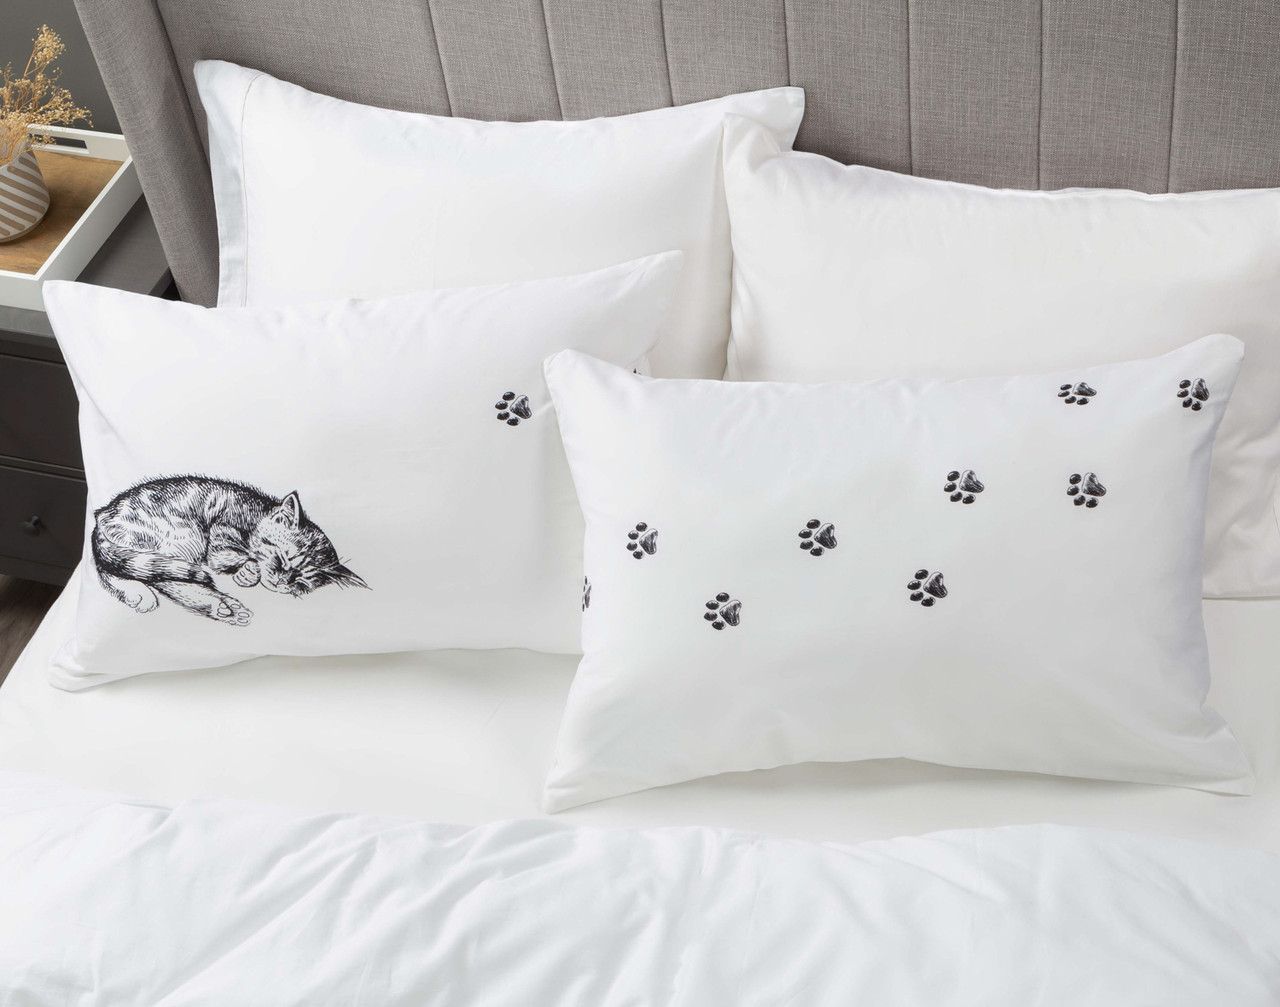 Angled view of our Sleeping Cat Pillowcases sitting on a half-dressed white bed.